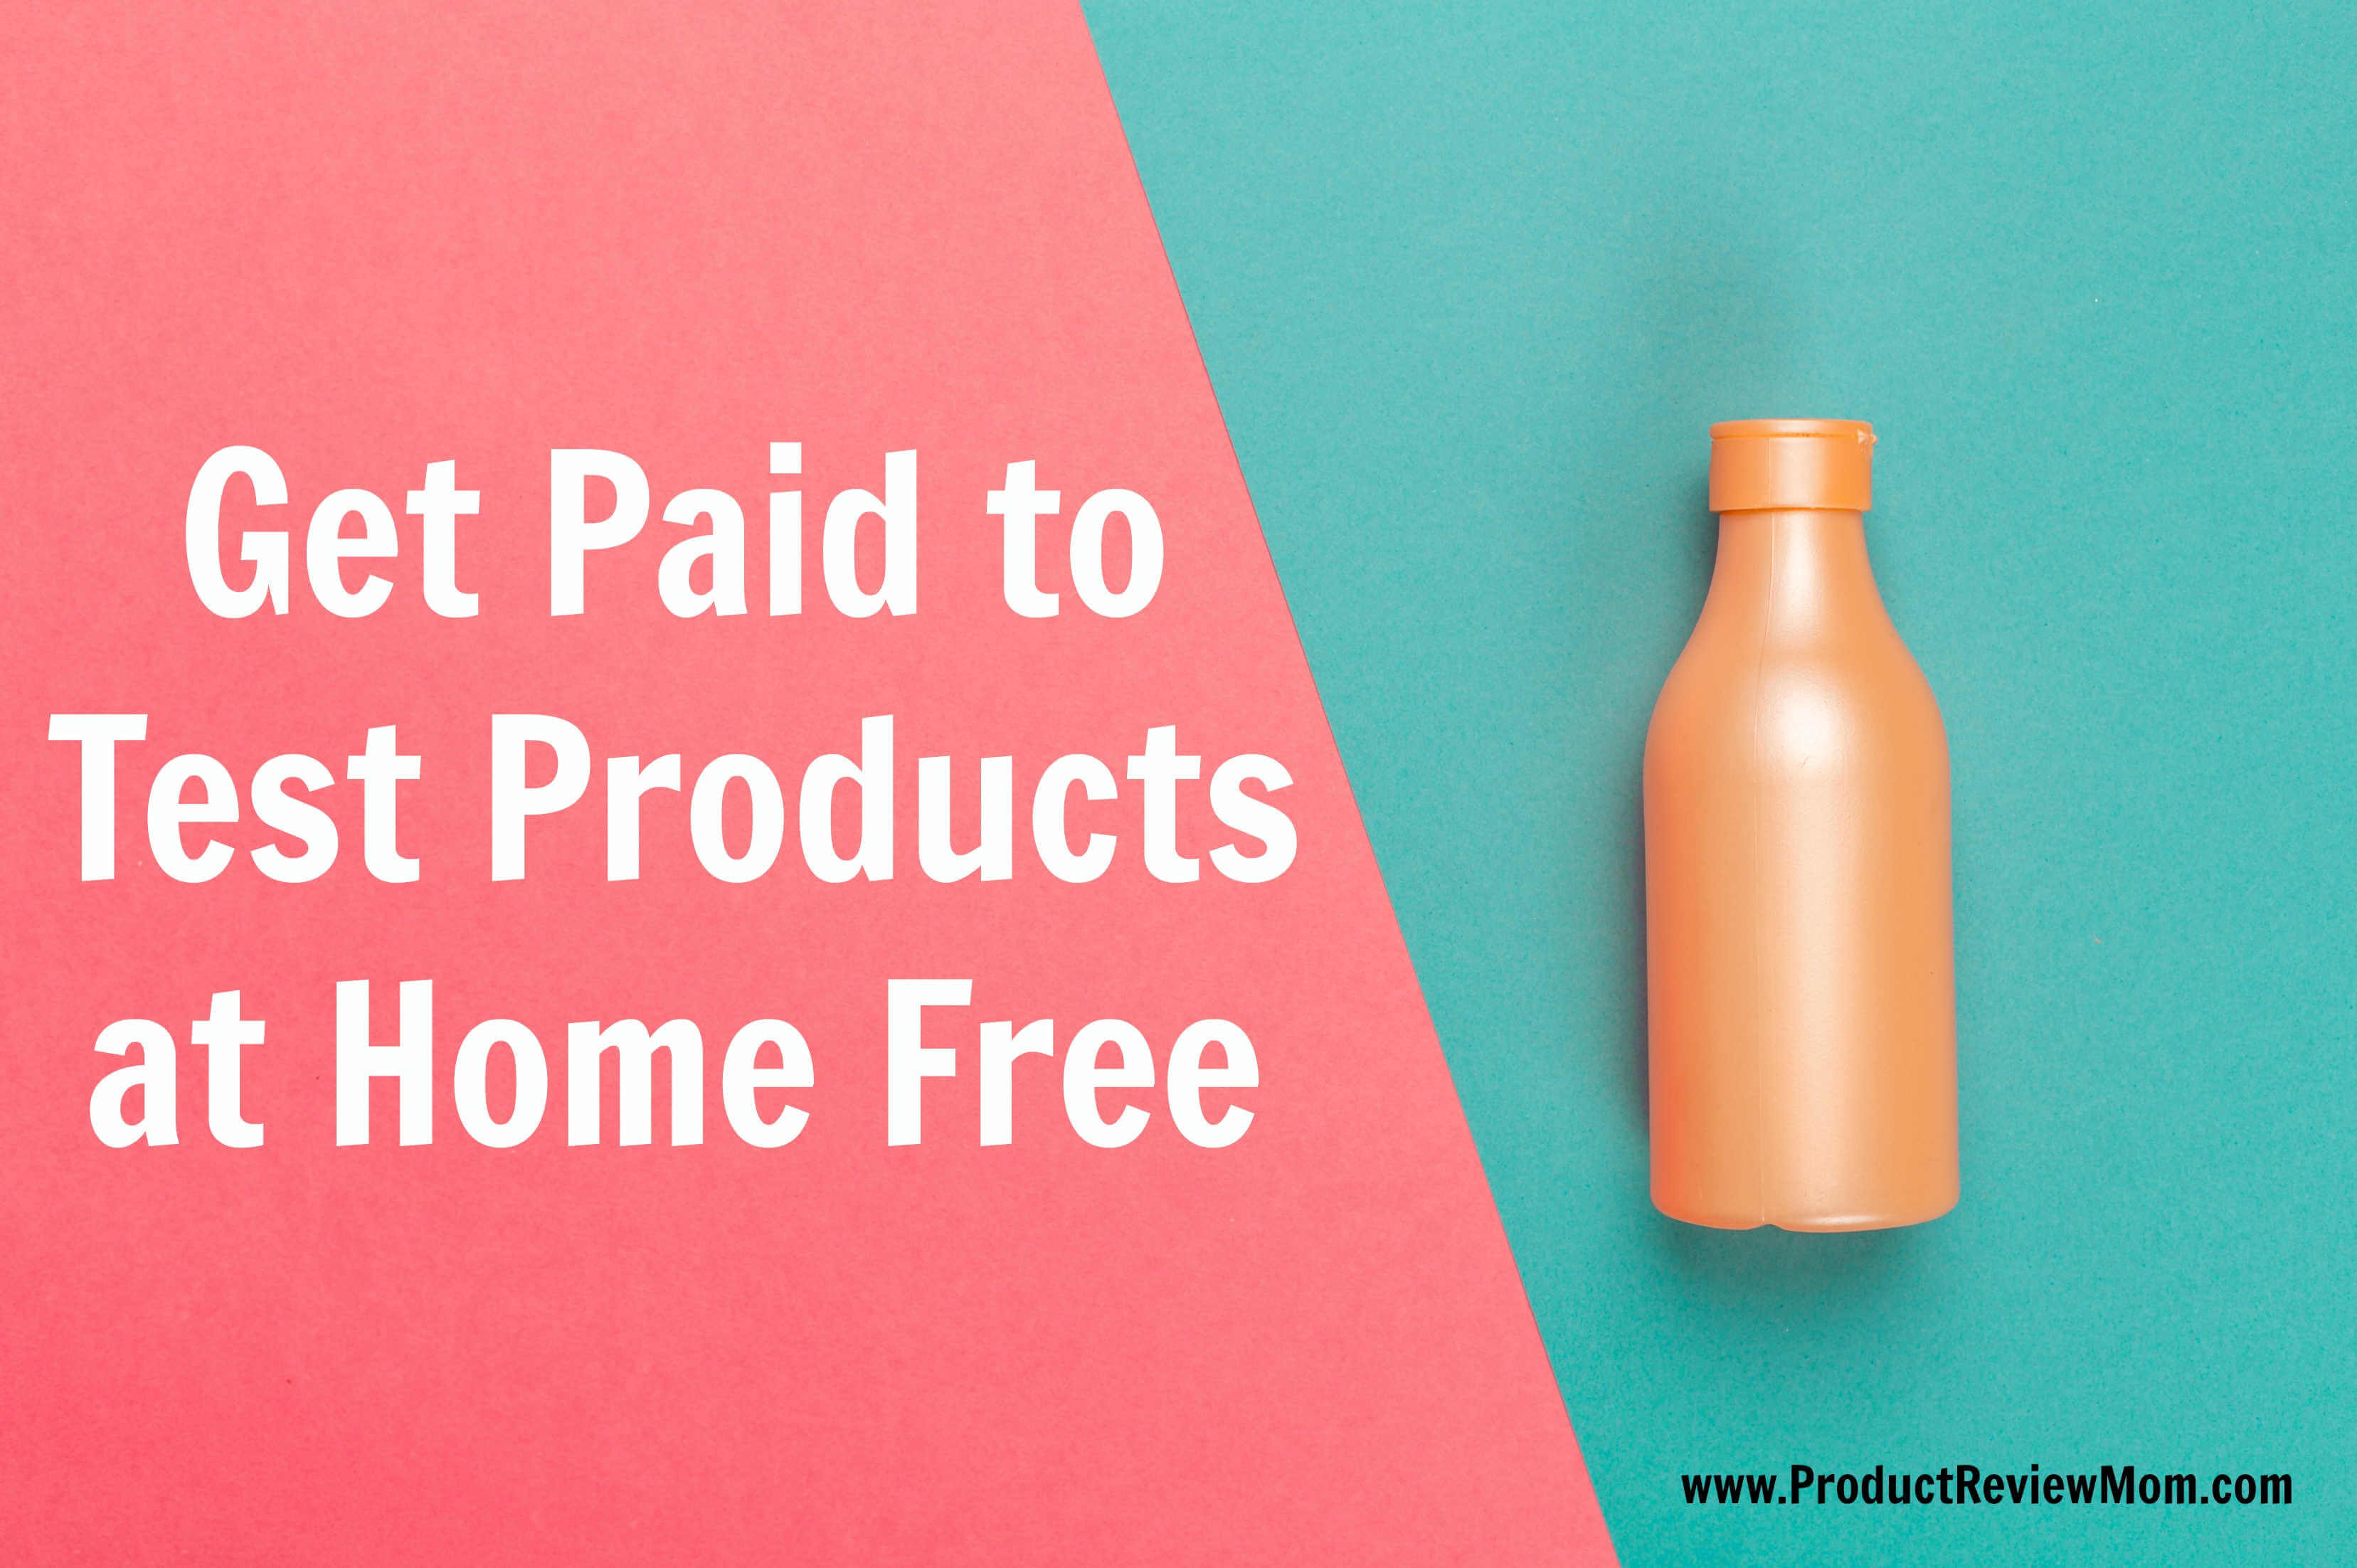 How to Get Paid to Test and Review Products at Home Free